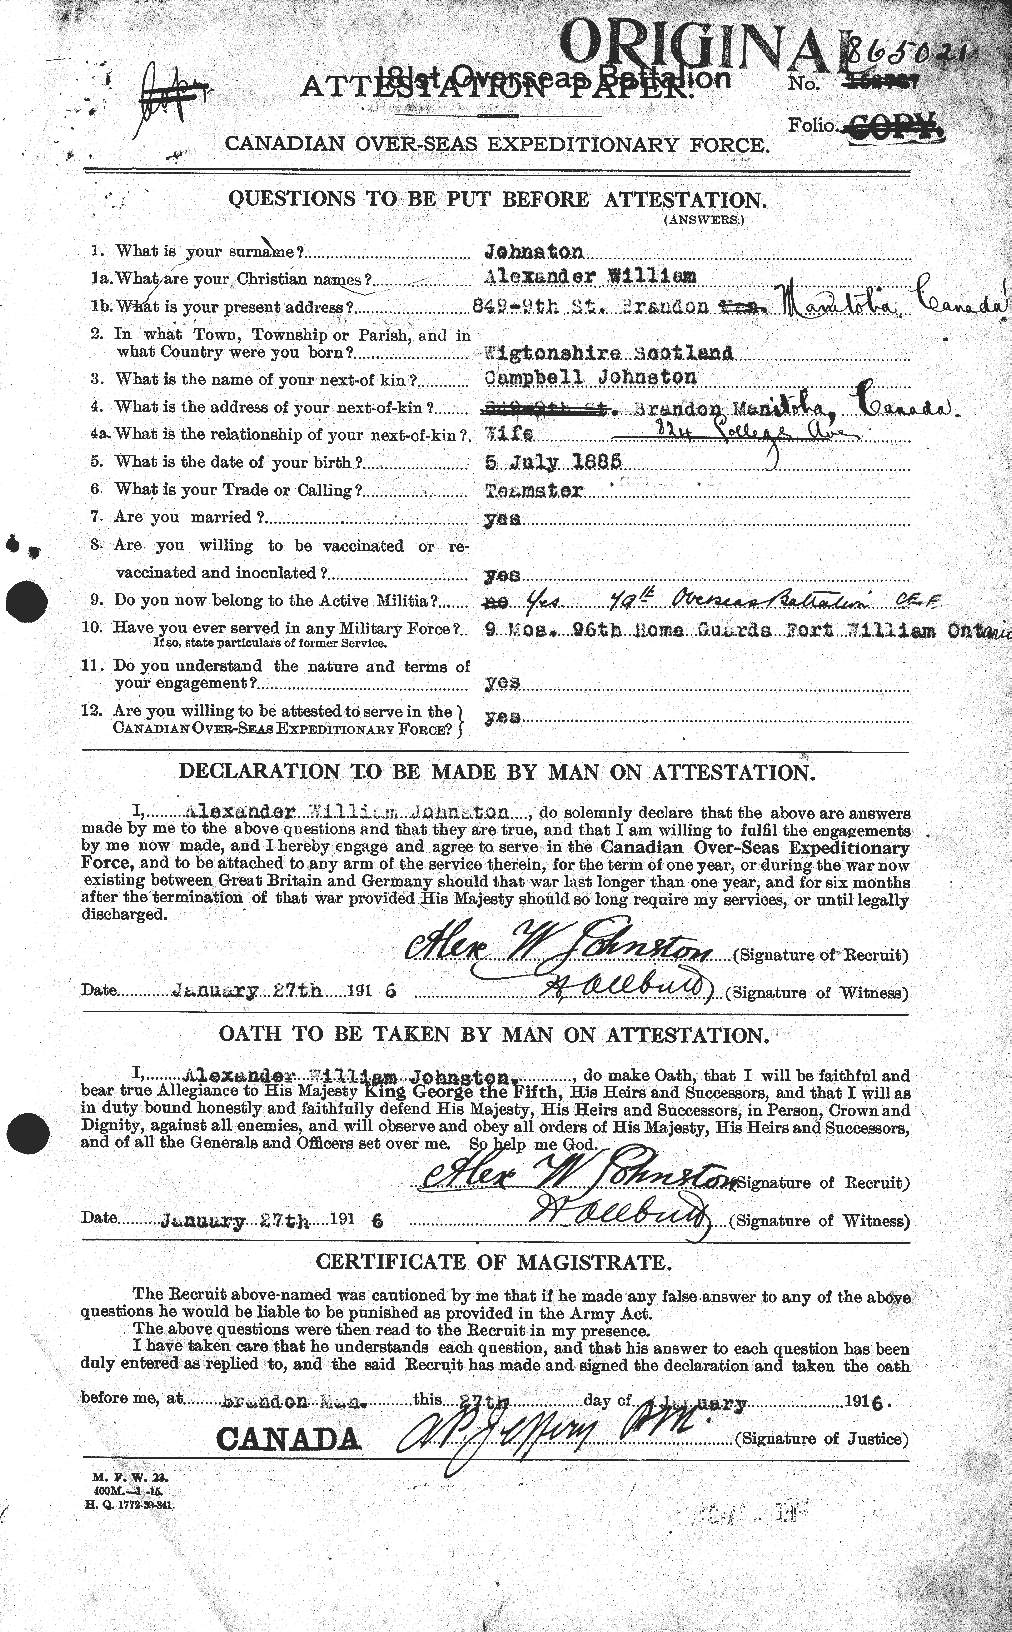 Personnel Records of the First World War - CEF 420982a